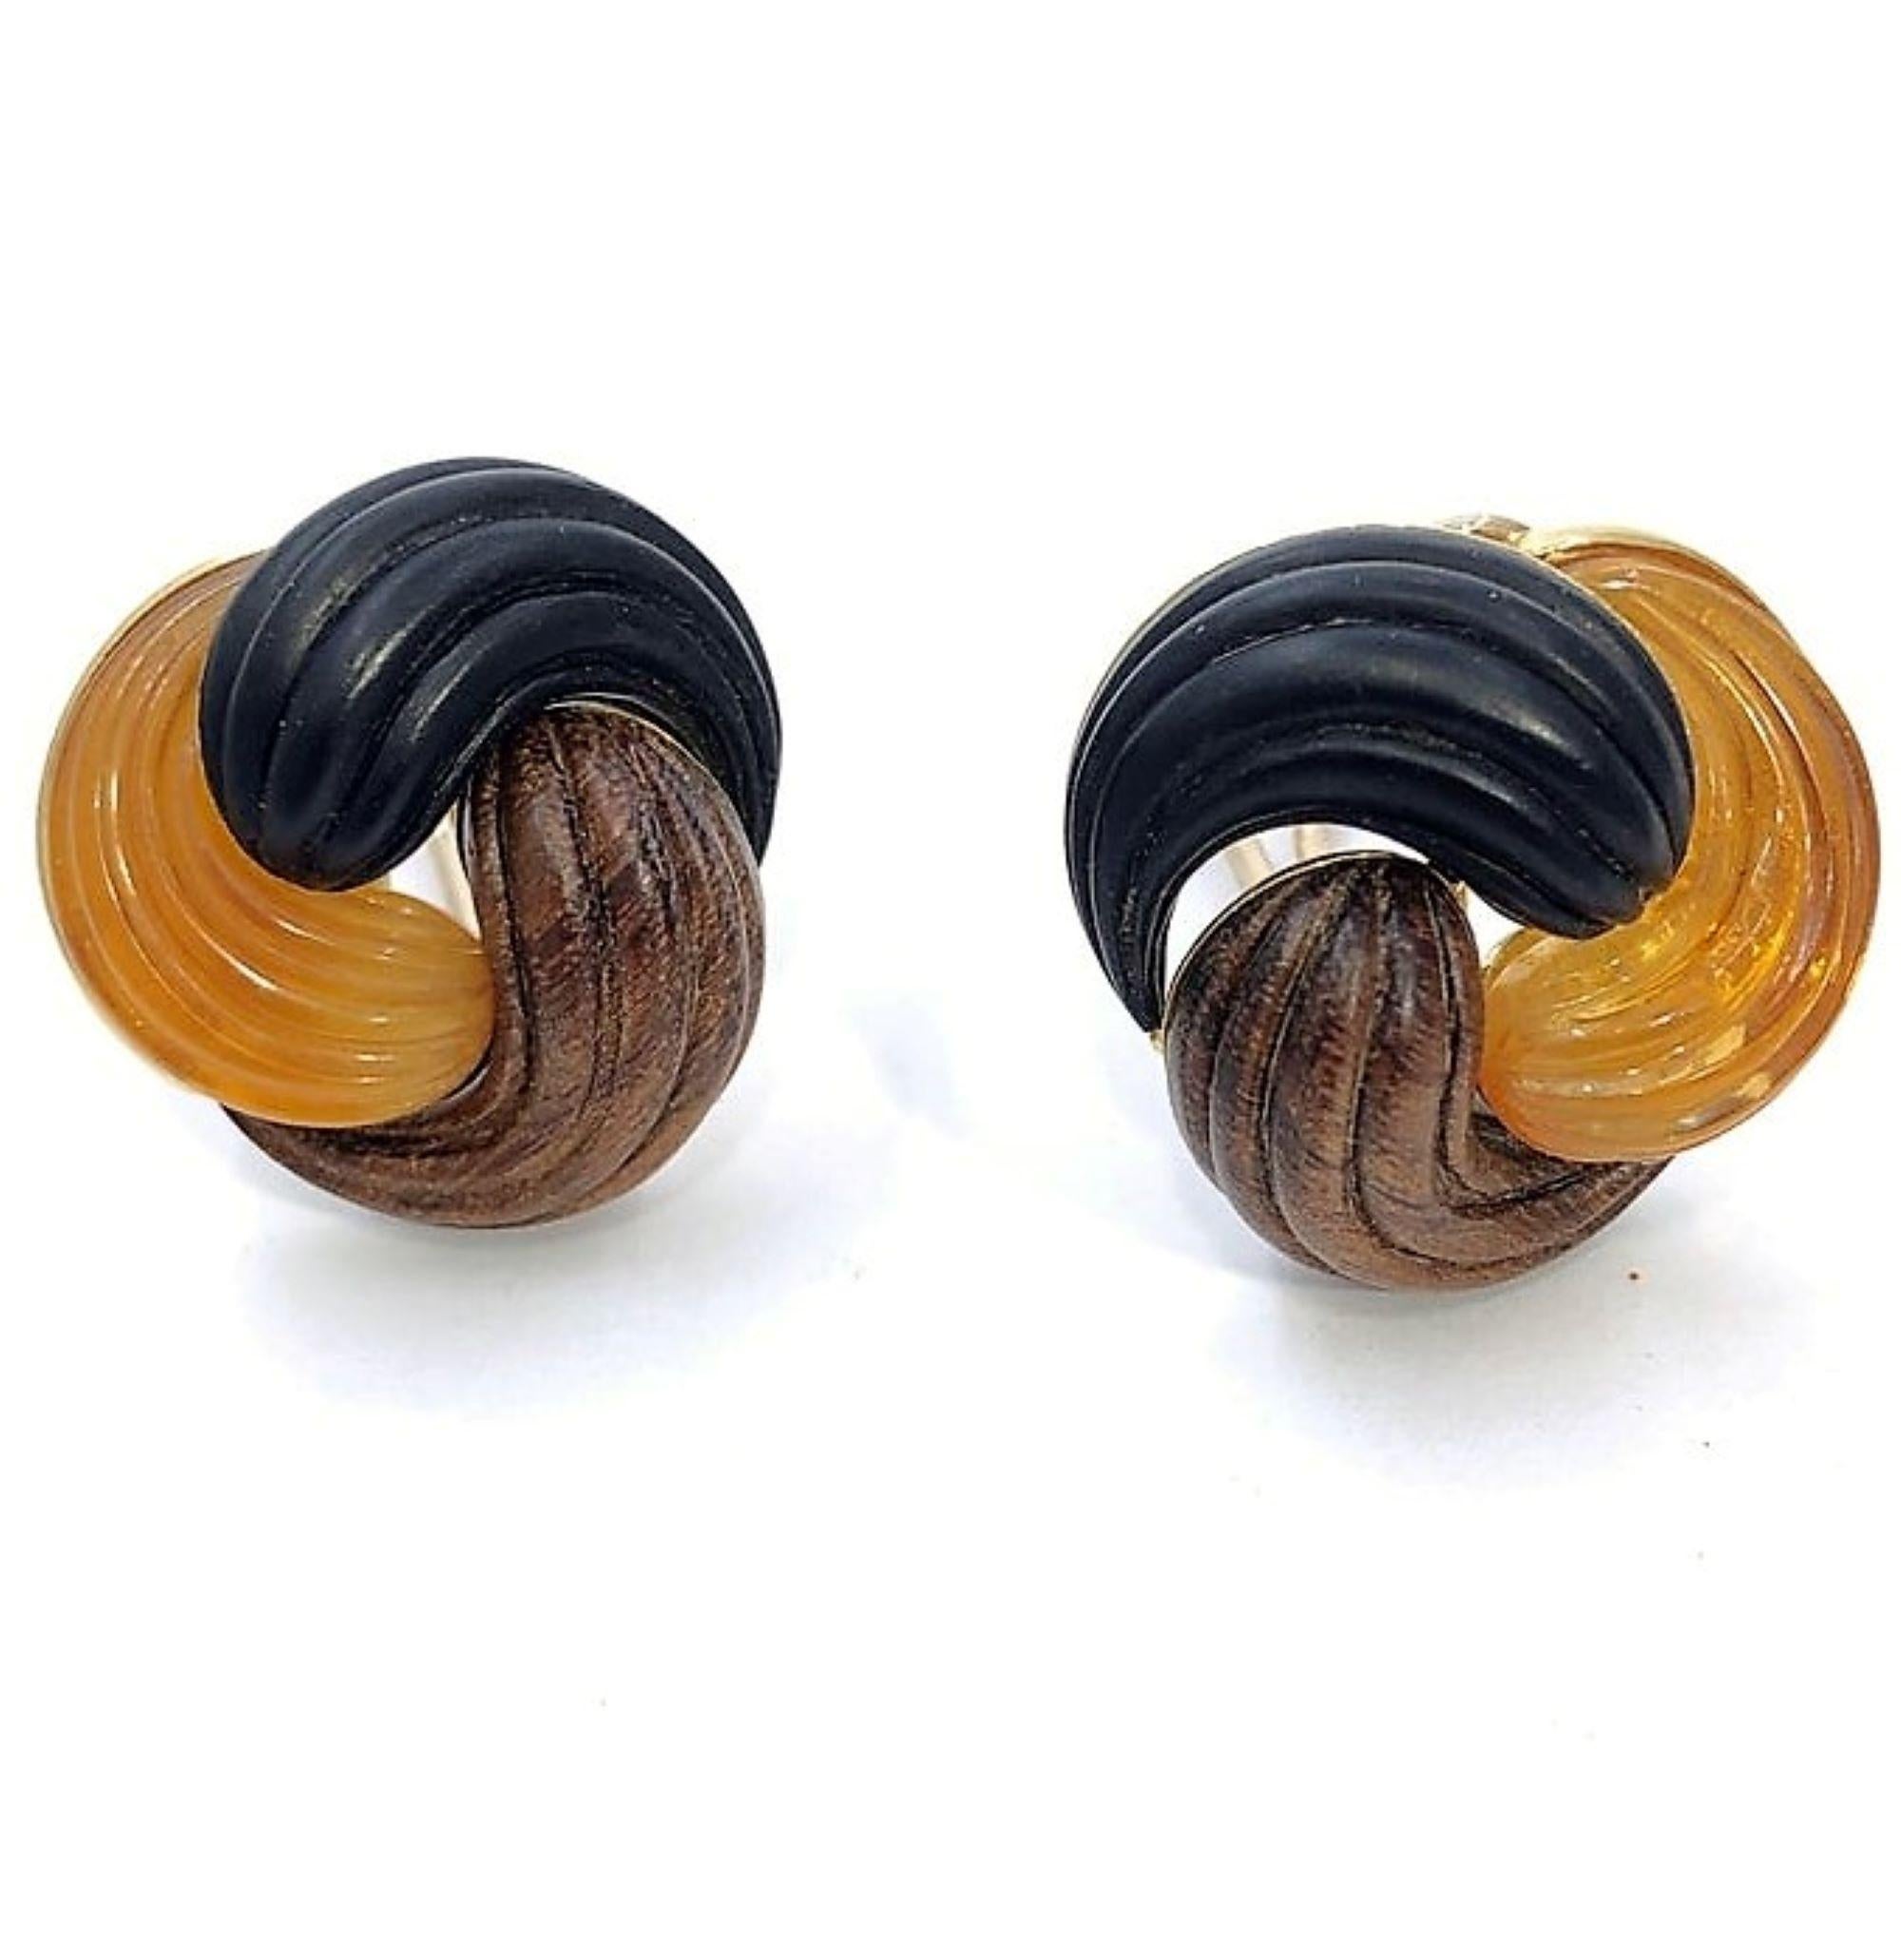 Cabochon Lovely Italian Autumn Colored Fluted Woods, Amber and Gold Knot Style Earrings